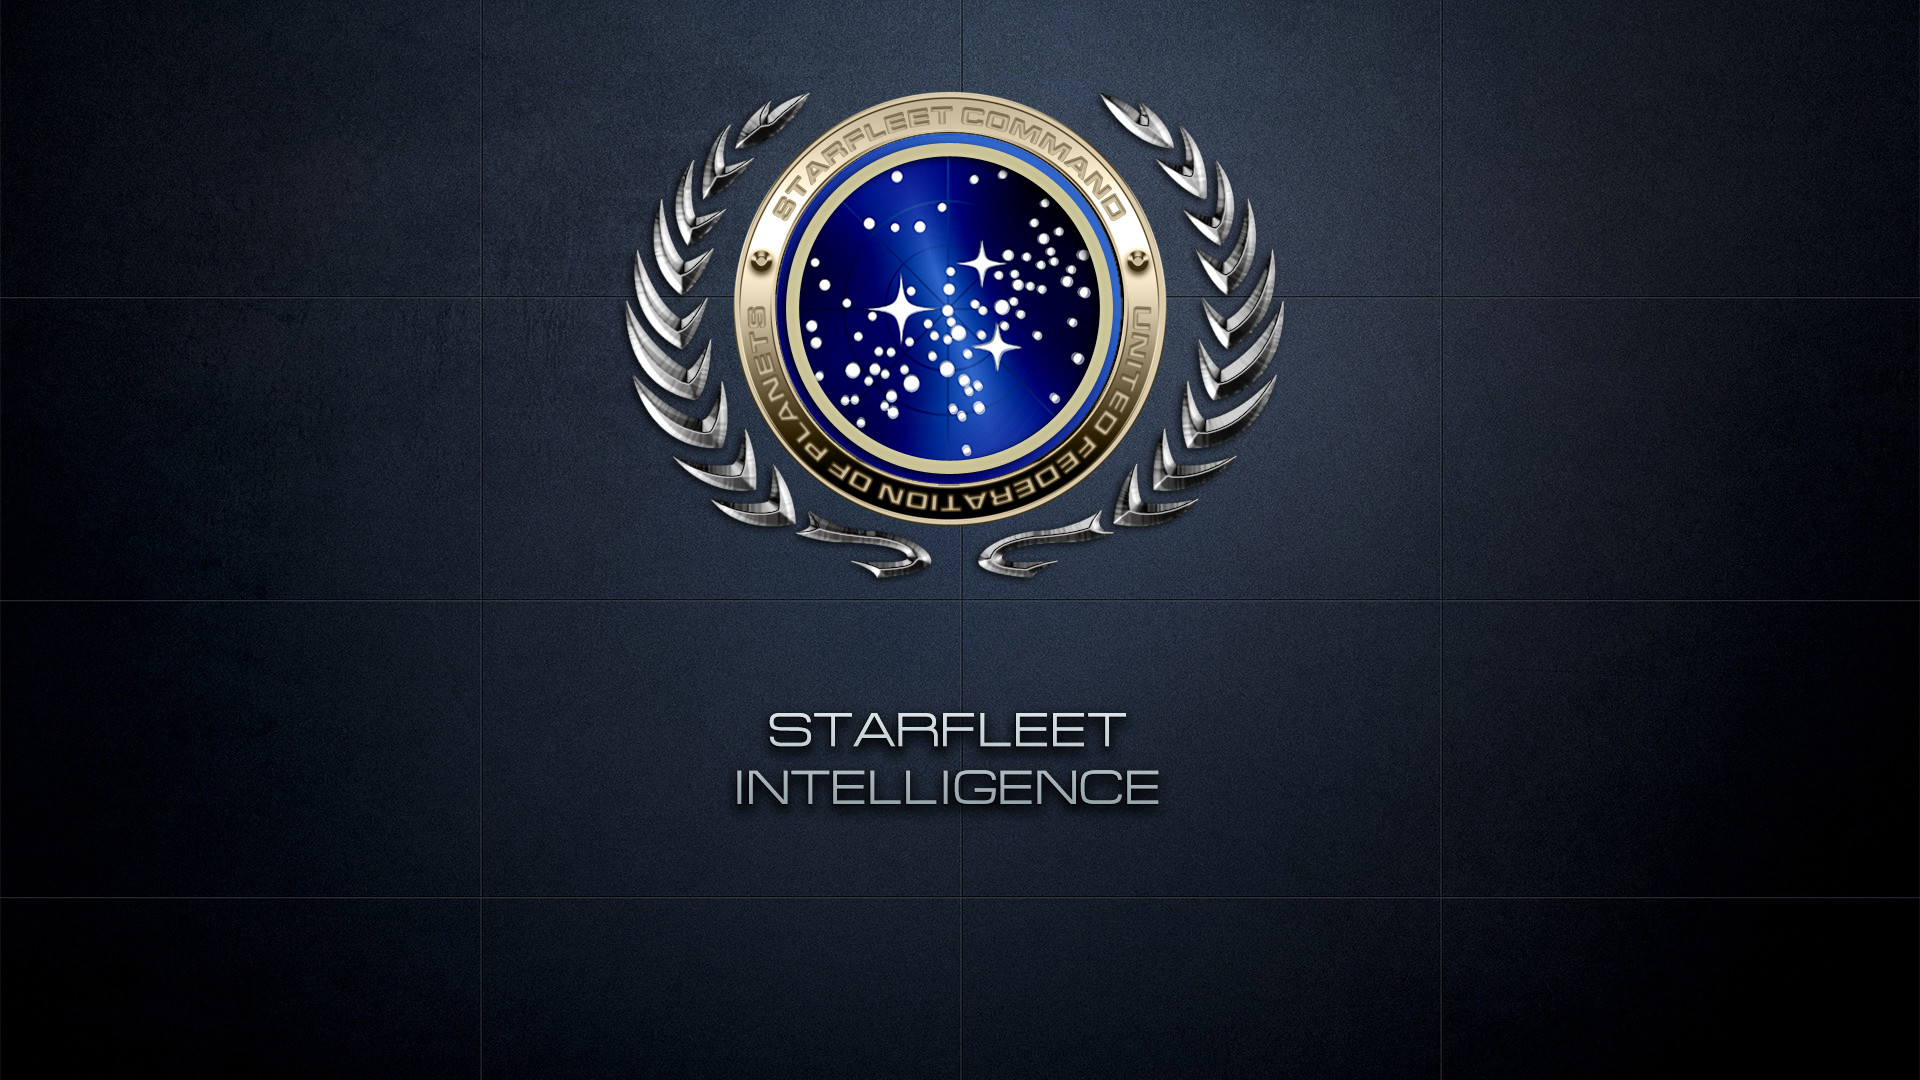 #STARFLEET INTELLIGENCE Insignia of the United Federation of Planets and alternative logo of the